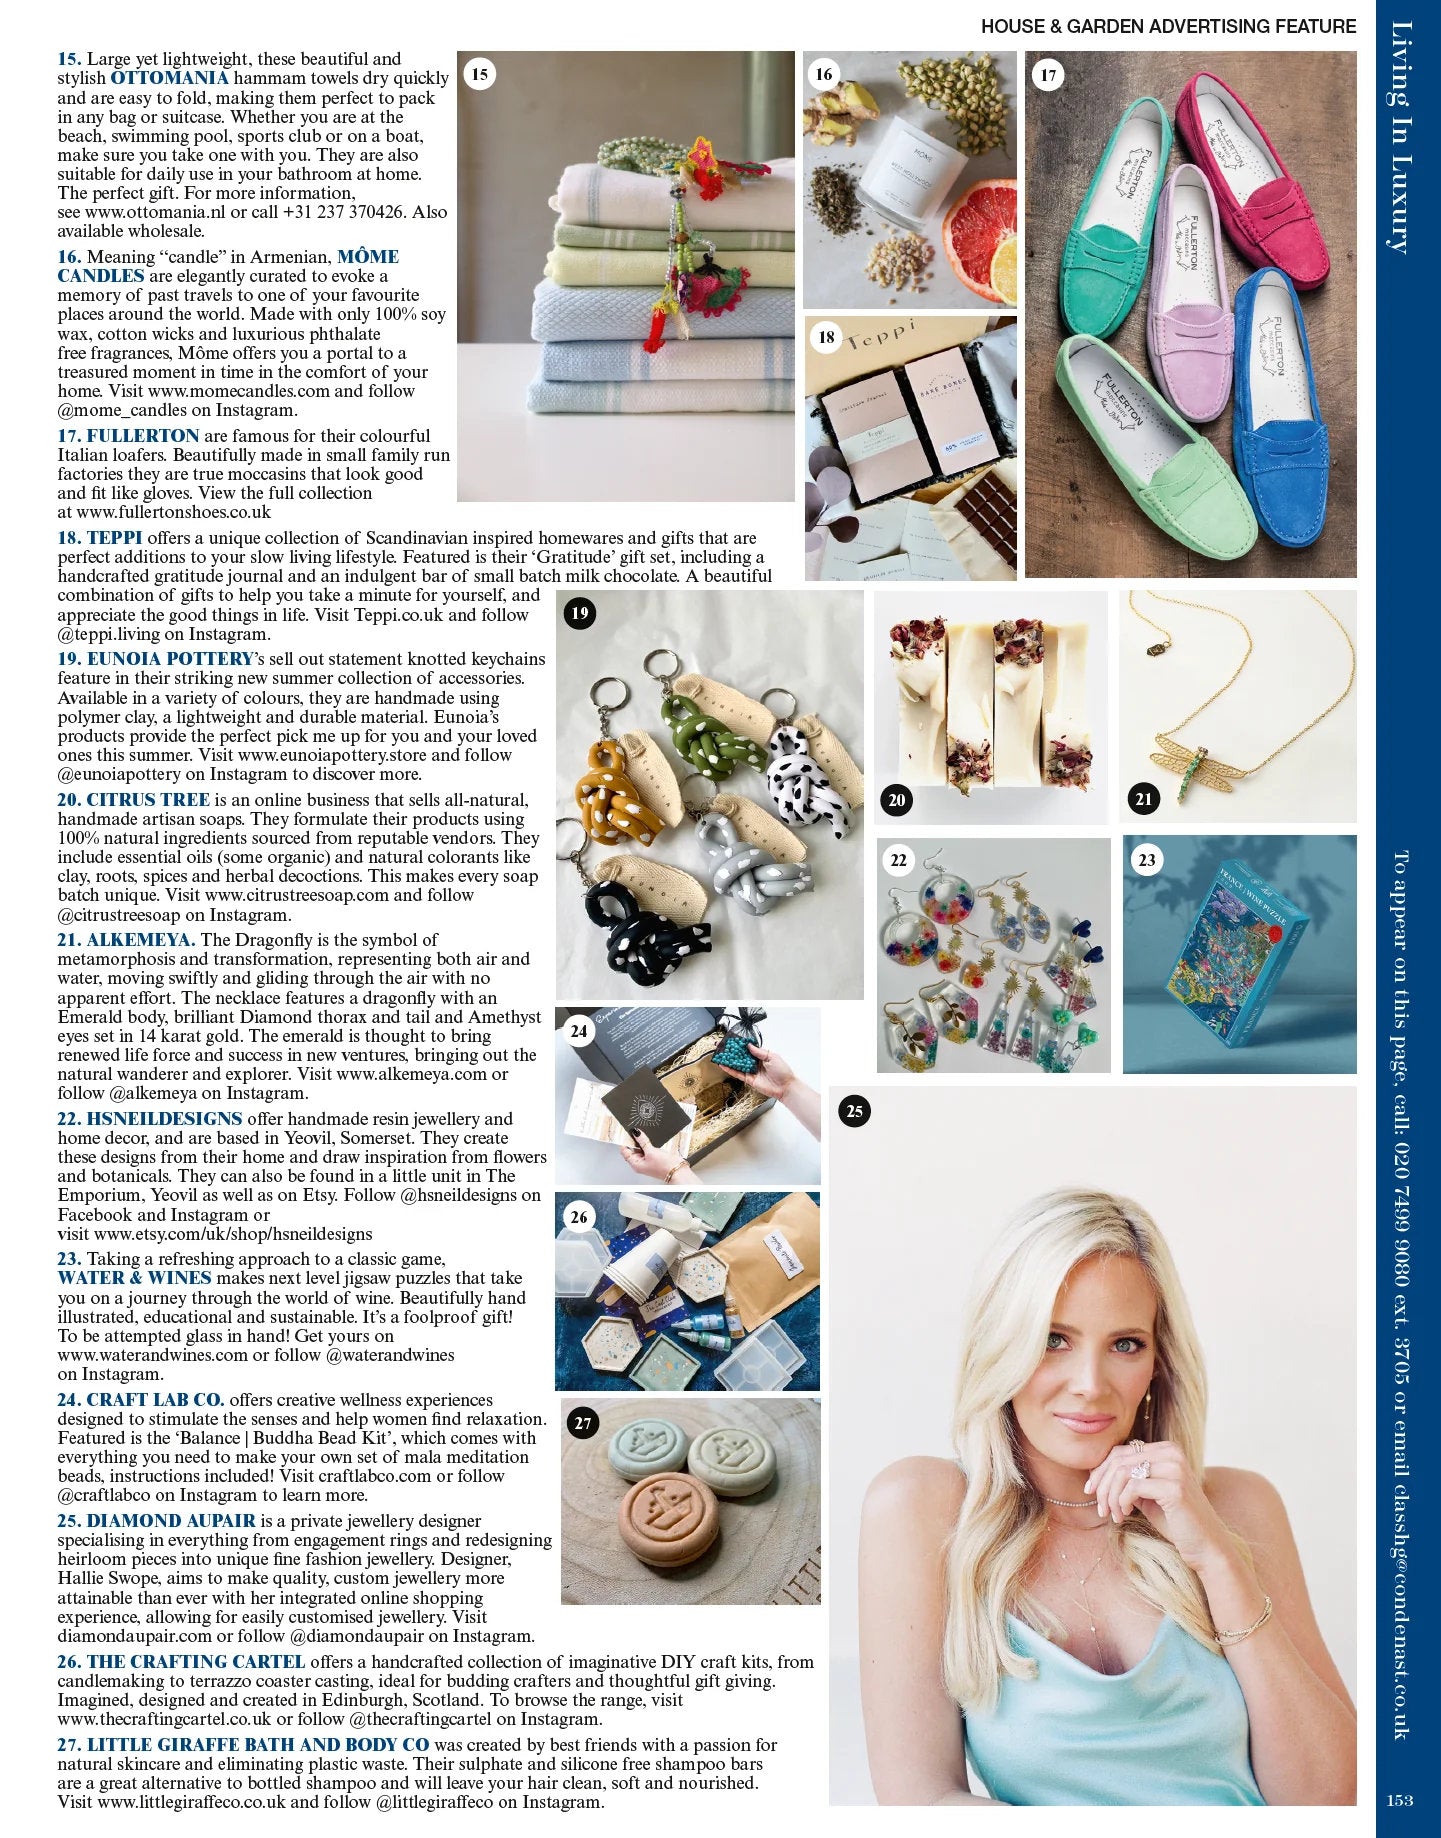 Living In Luxury article in House & Garden Citrus Tree Soaps